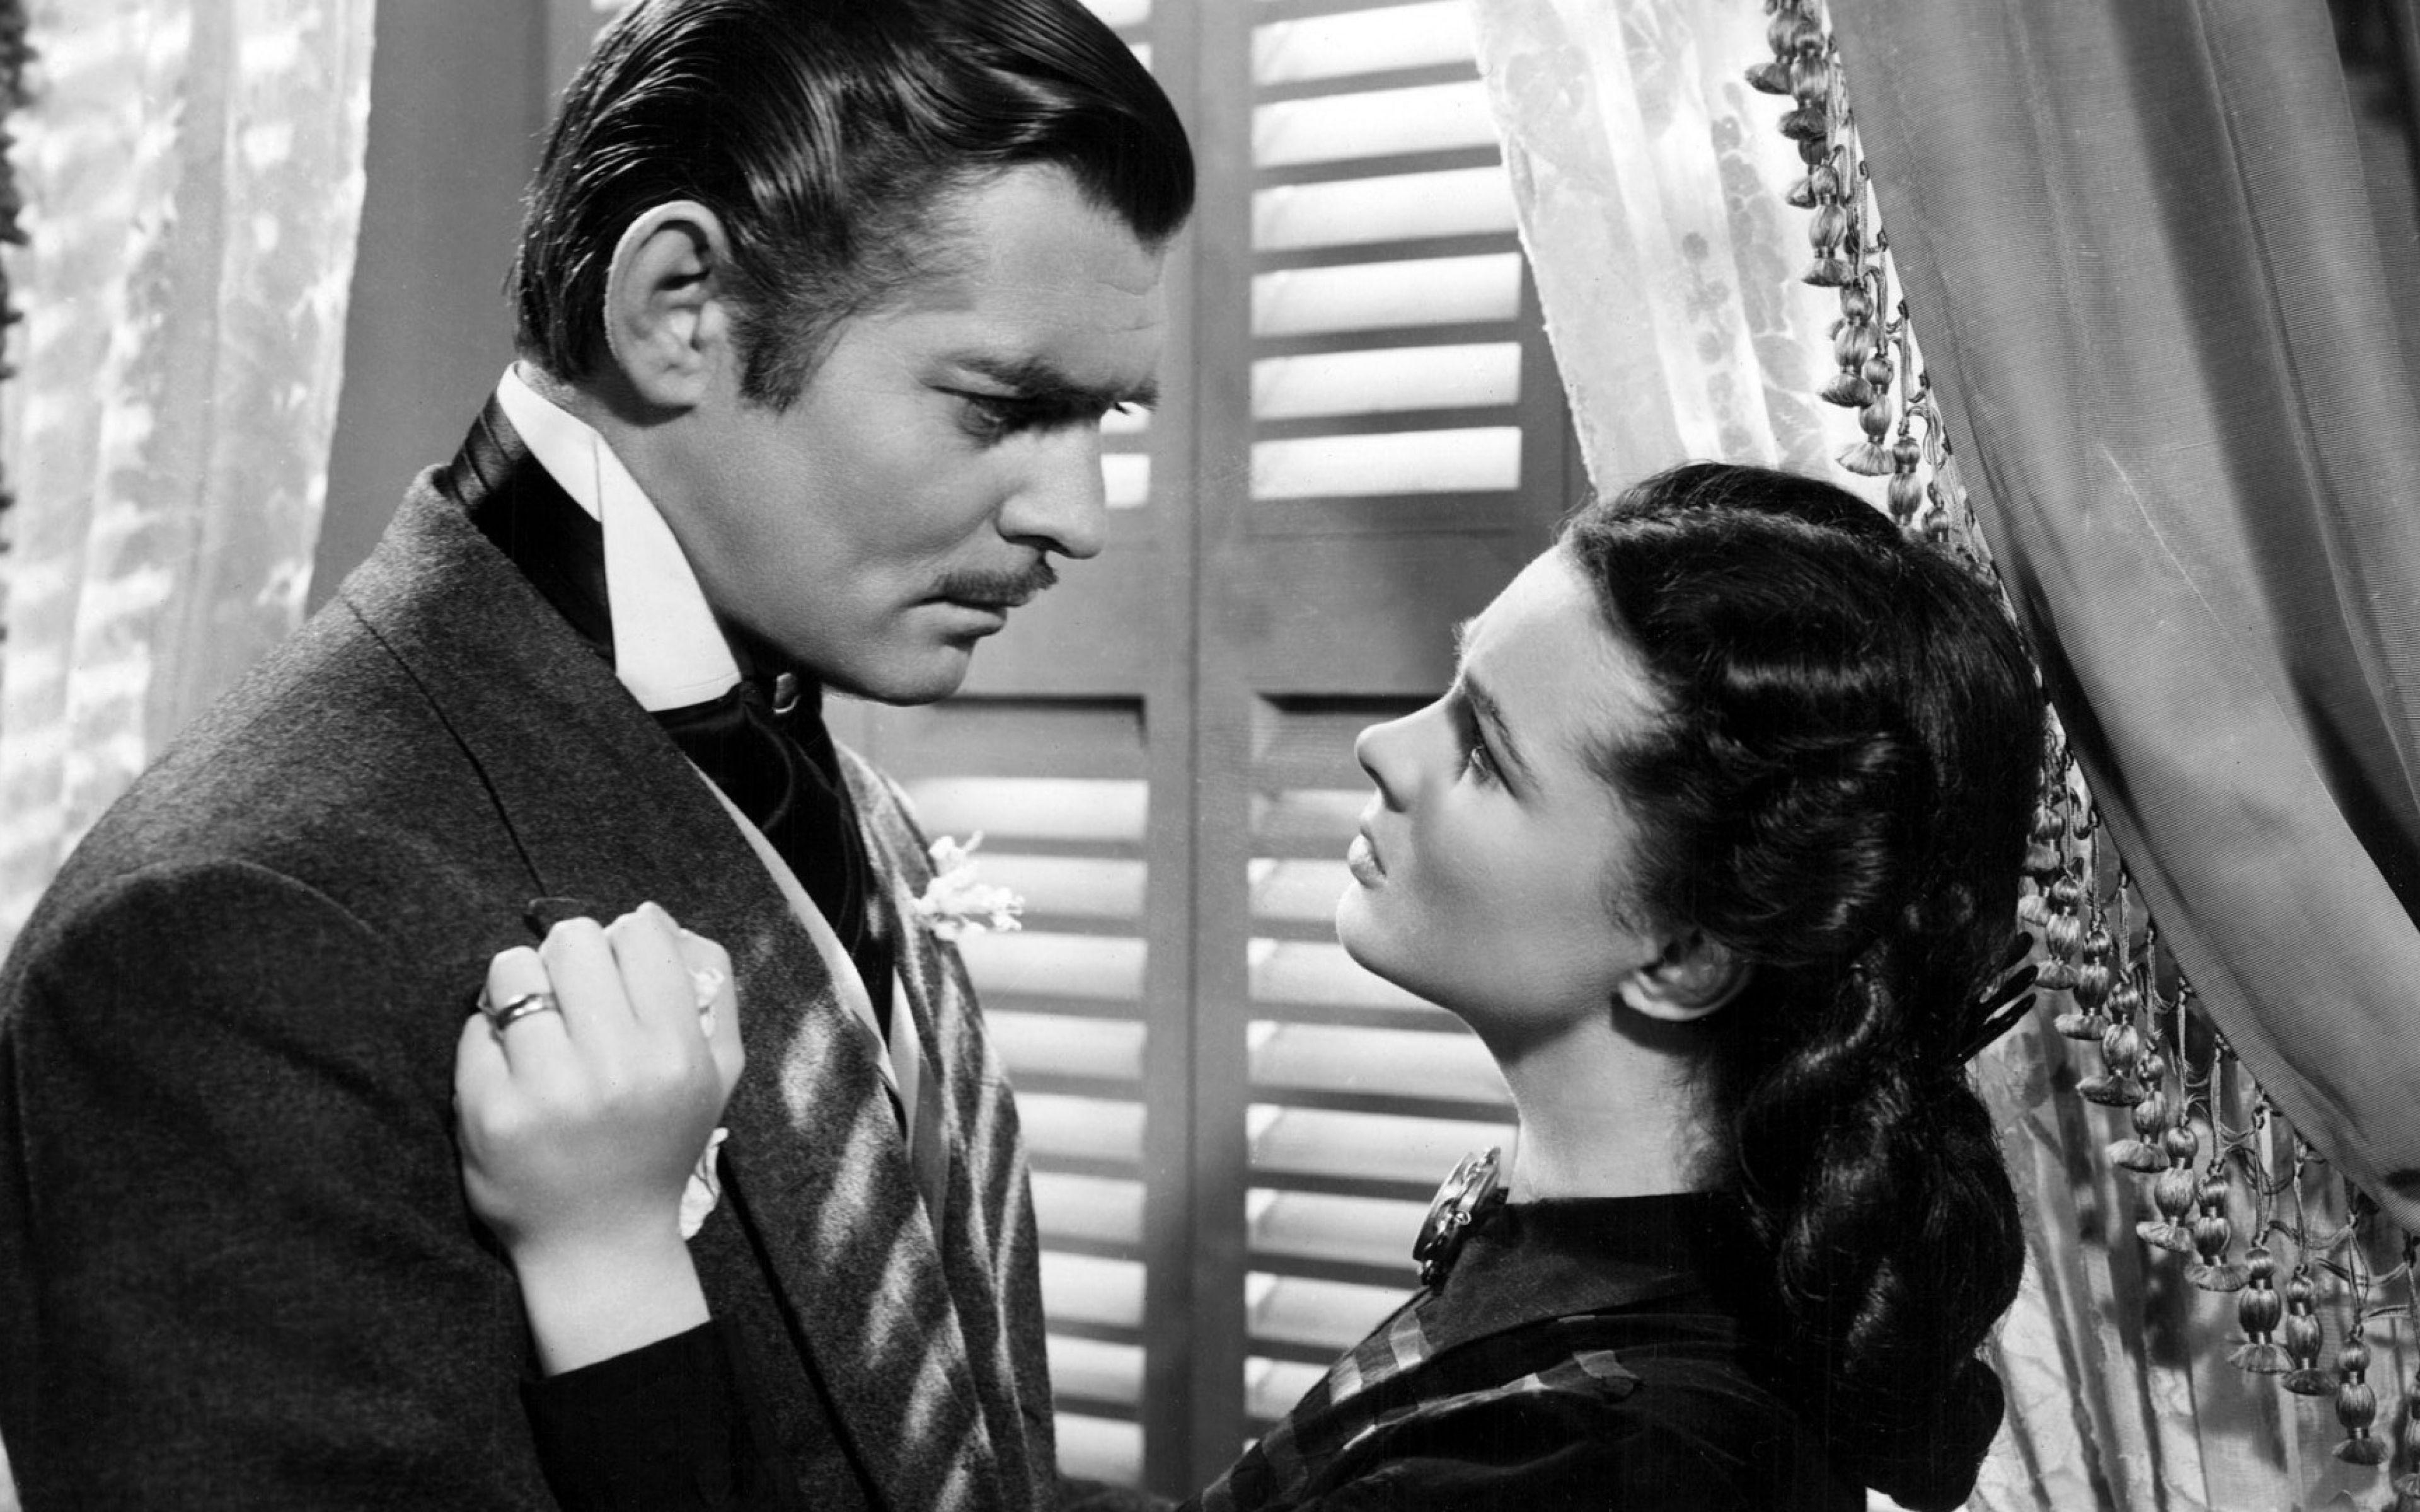 Download Wallpaper 3840x2400 Gone with the wind, Vivien leigh